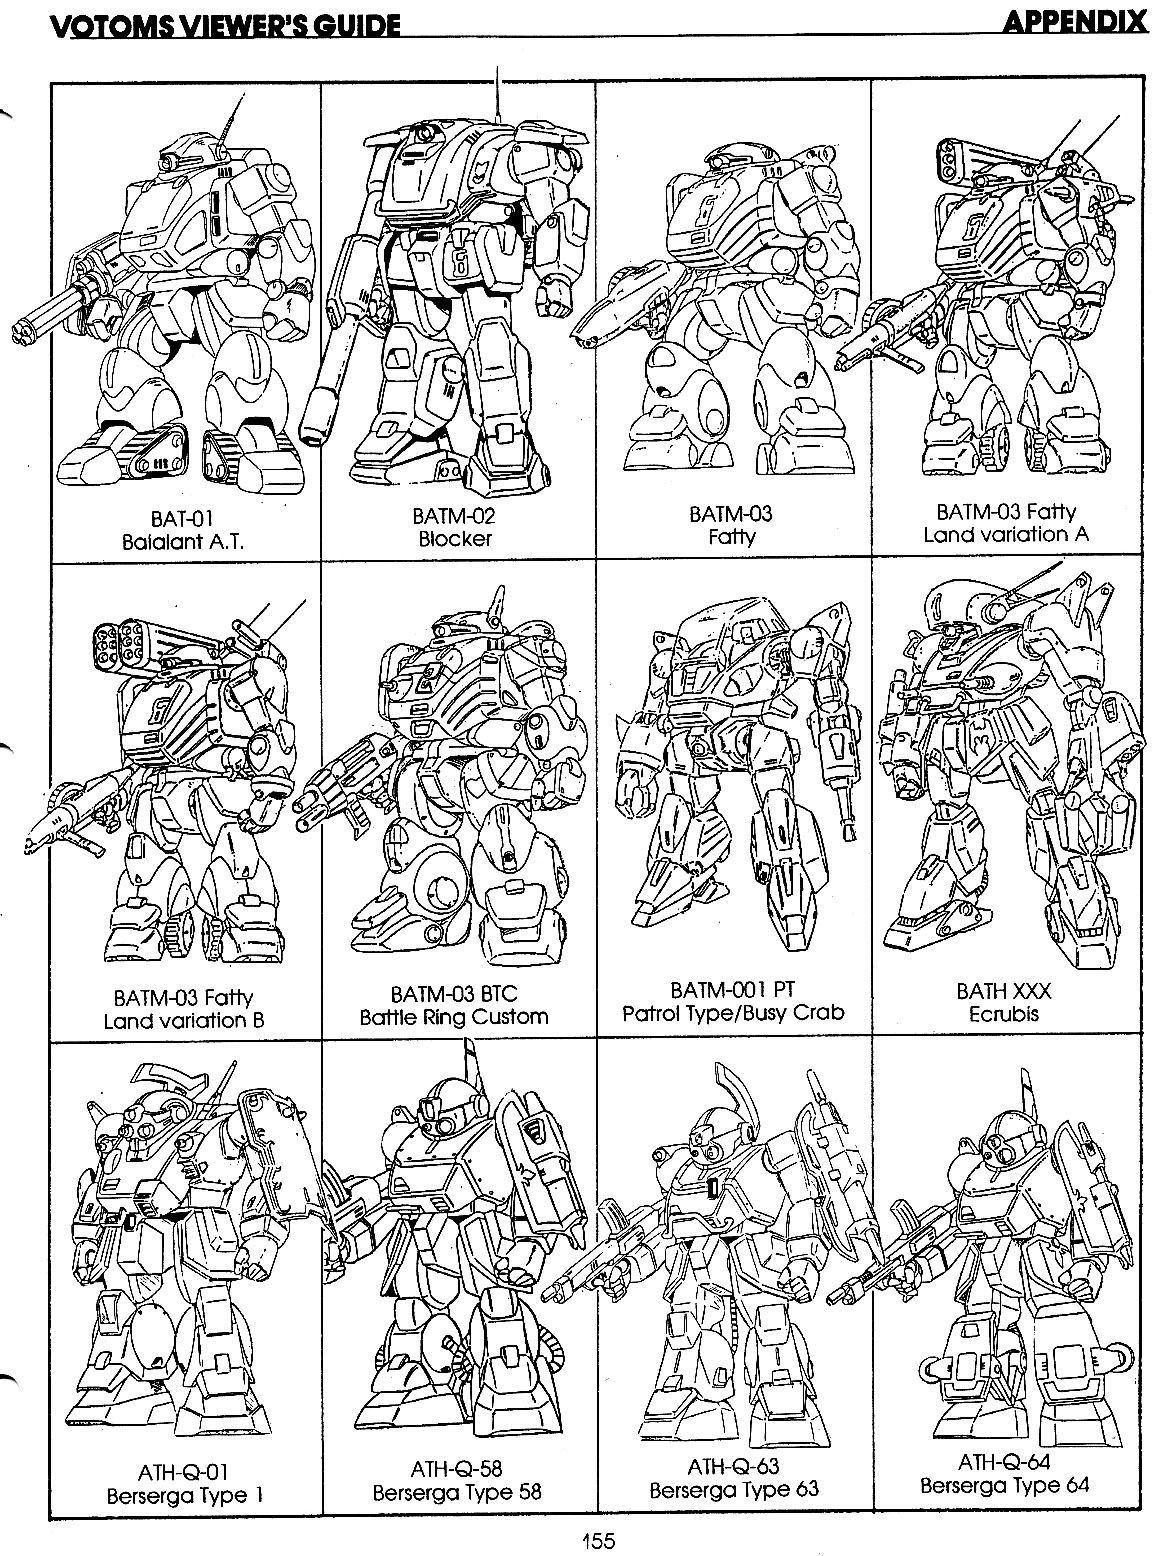 VOTOMS Viewing Guide 155